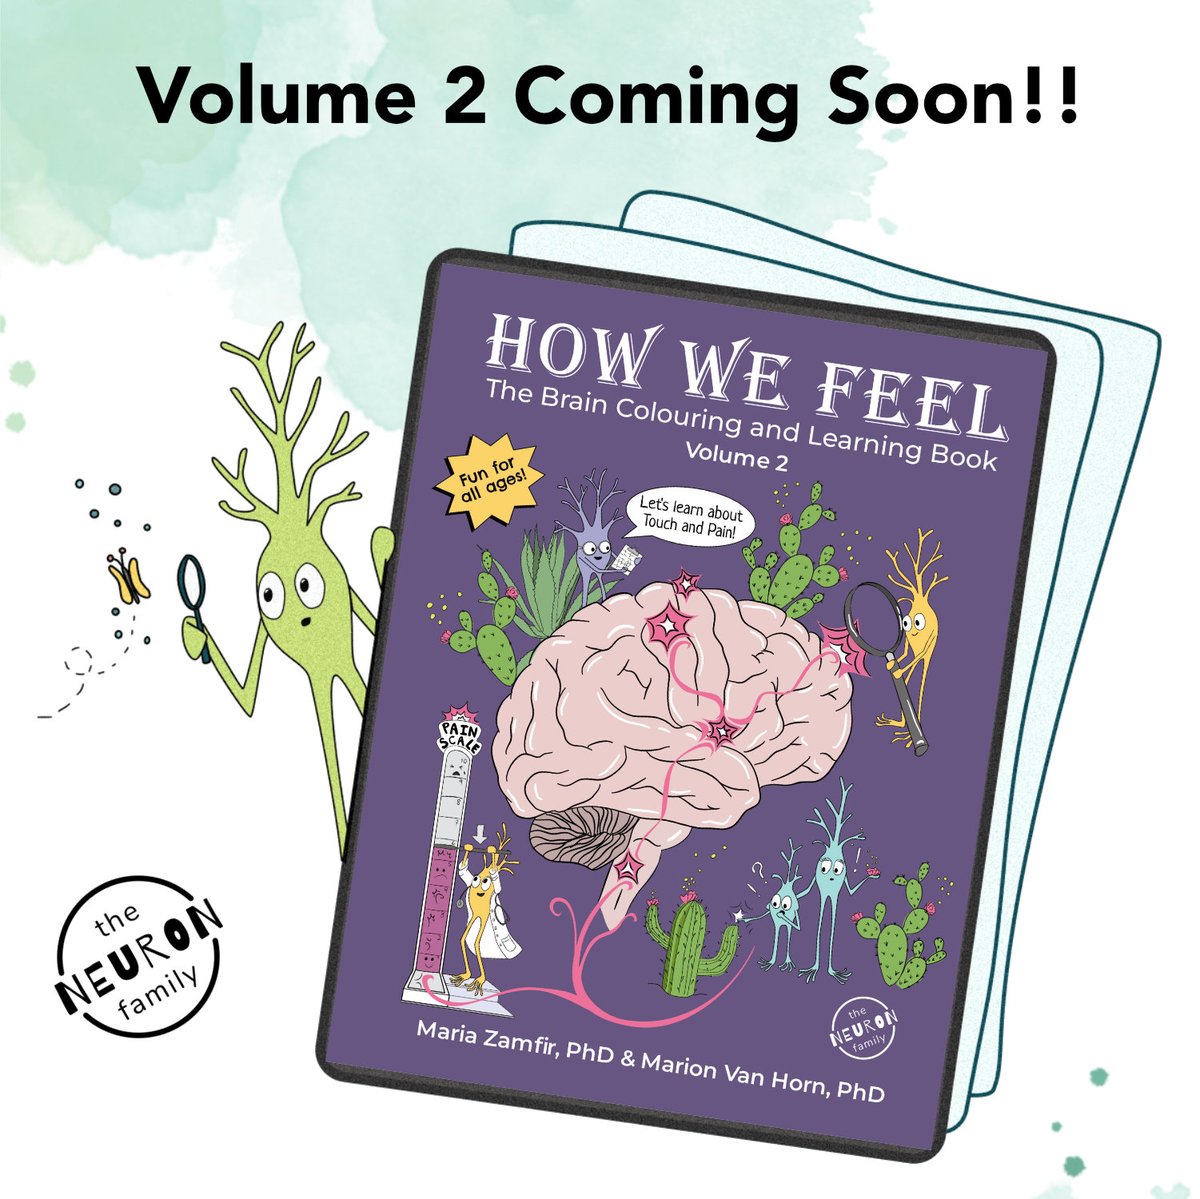 The second volume of the Brain Colouring and Learning Book is coming soon! ✨ 'How We Feel' will cover everything you need to know about Touch, Pain and Pain Relief ! Thanks to our official partners @rqrd_qprn @aecrpain for their support in creating this volume 2 😊📚